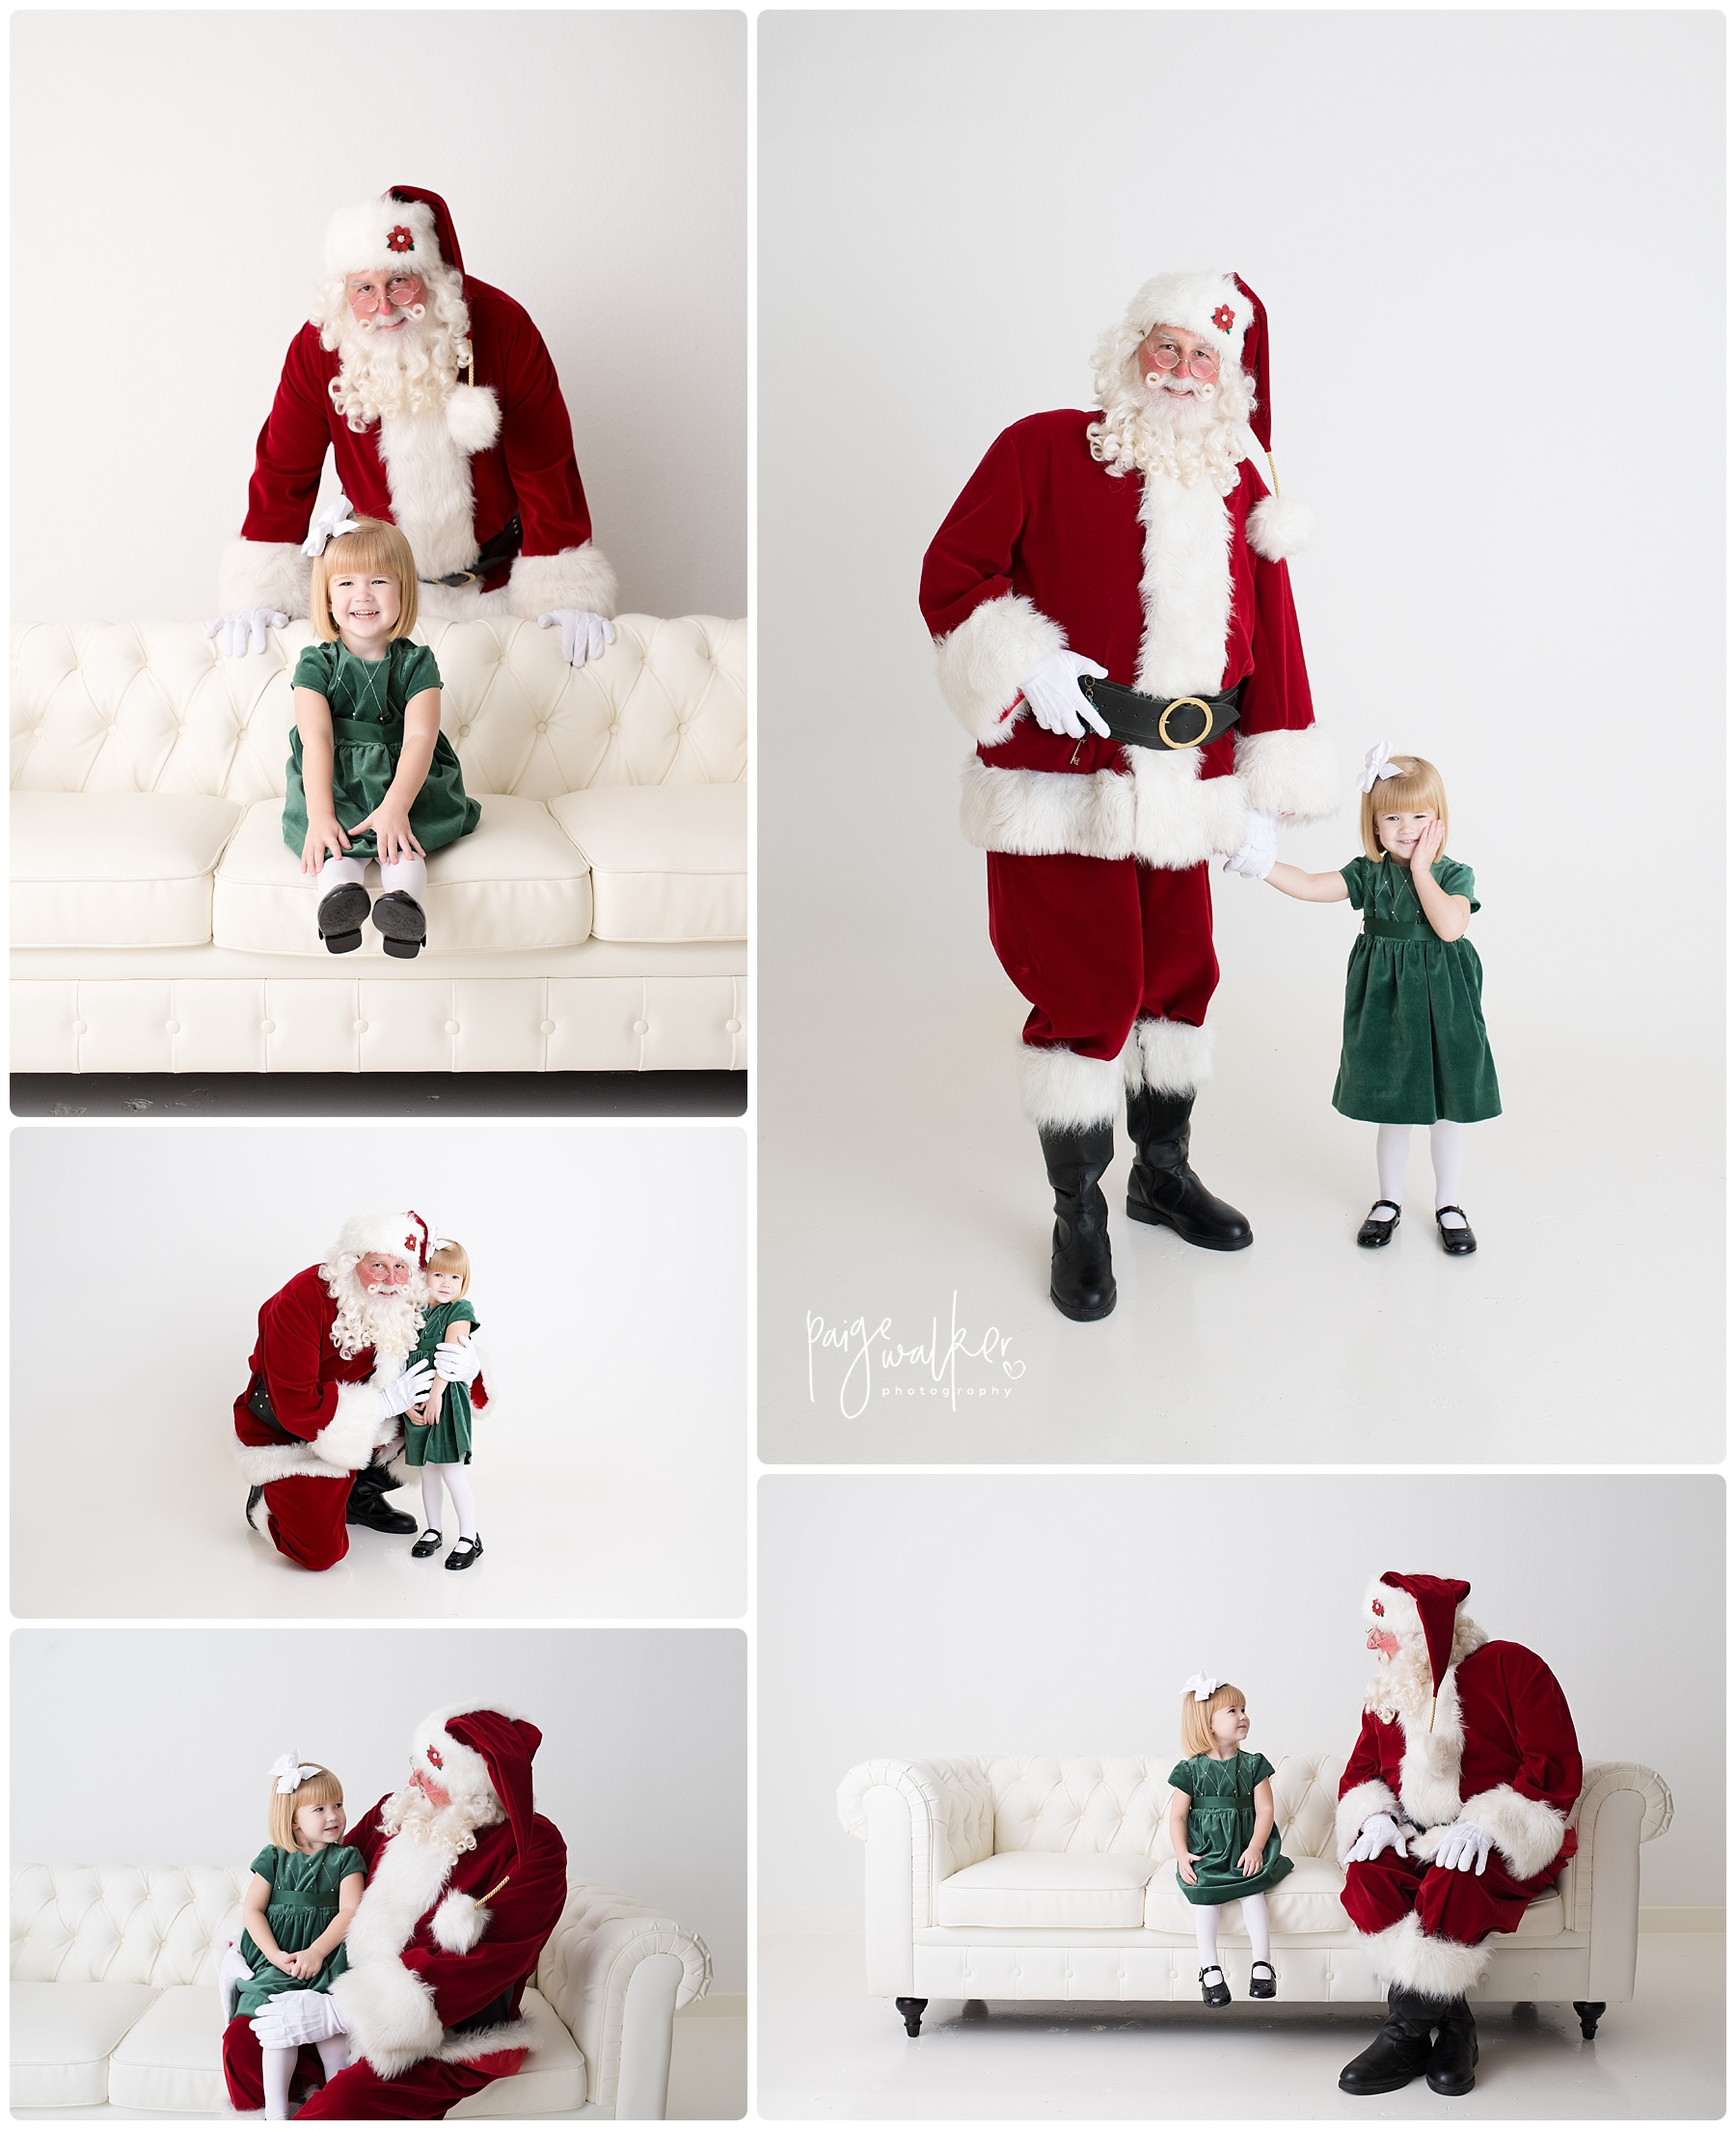 Santa holding hands with a little girl